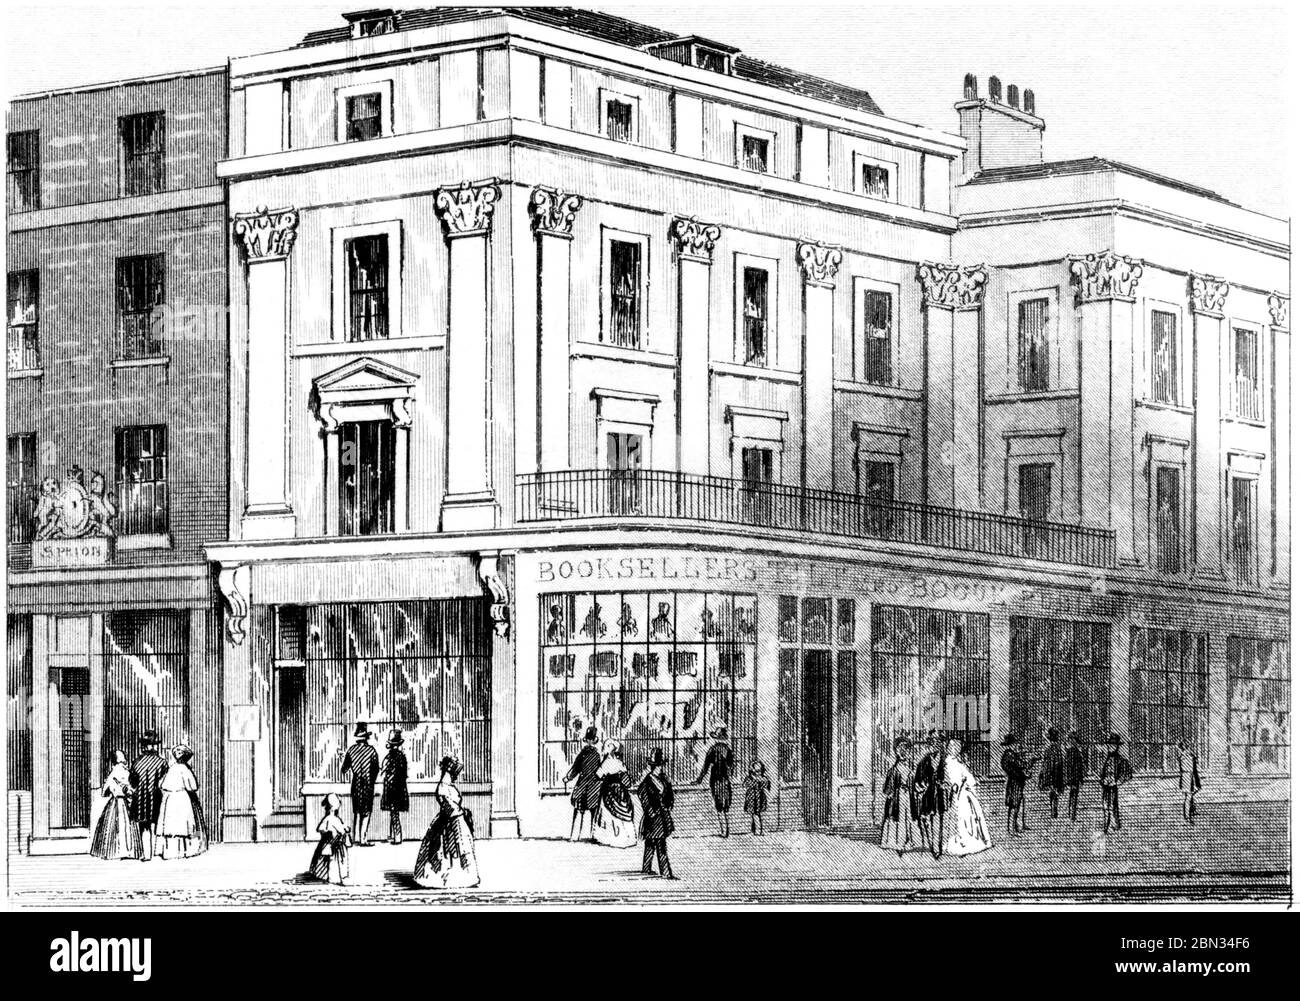 An engraving of St Brides Avenue London scanned at high resolution from a book printed in 1851. This image is believed to be free of all copyright. Stock Photo